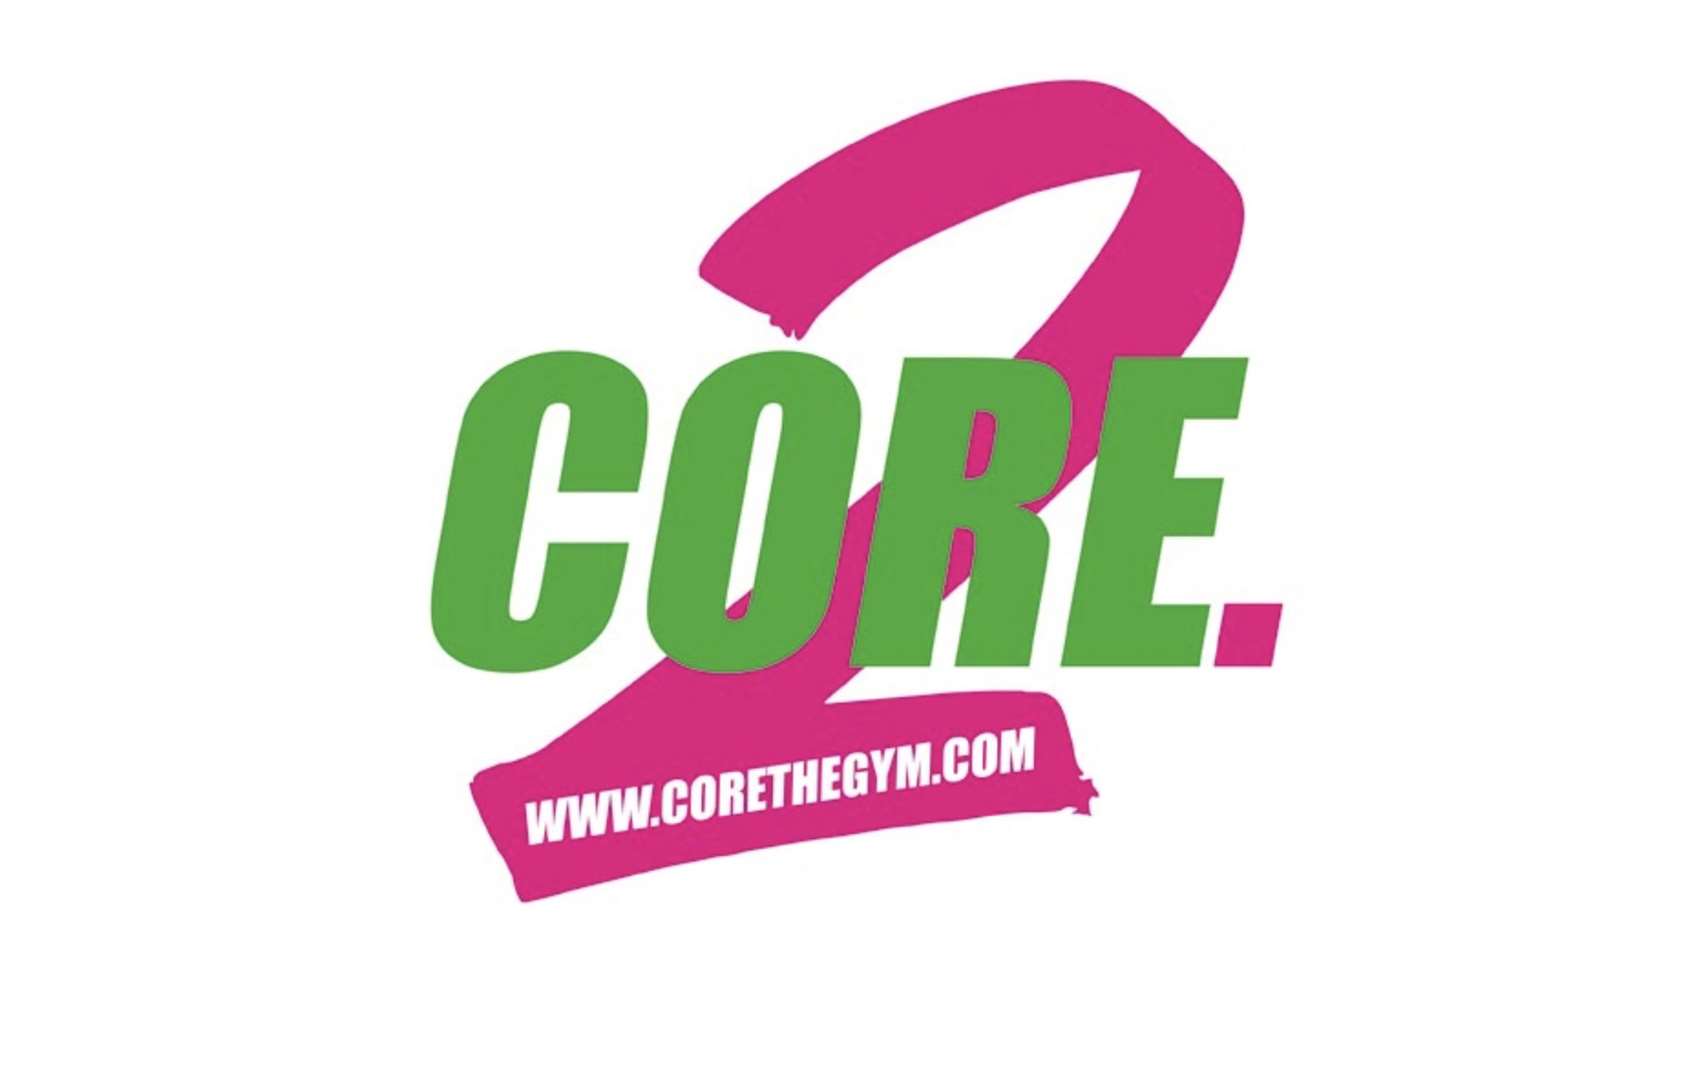 The Core 2 project, scheme set up by Core the Gym owner, Jay Atkins, to steer youths away from Knife crime